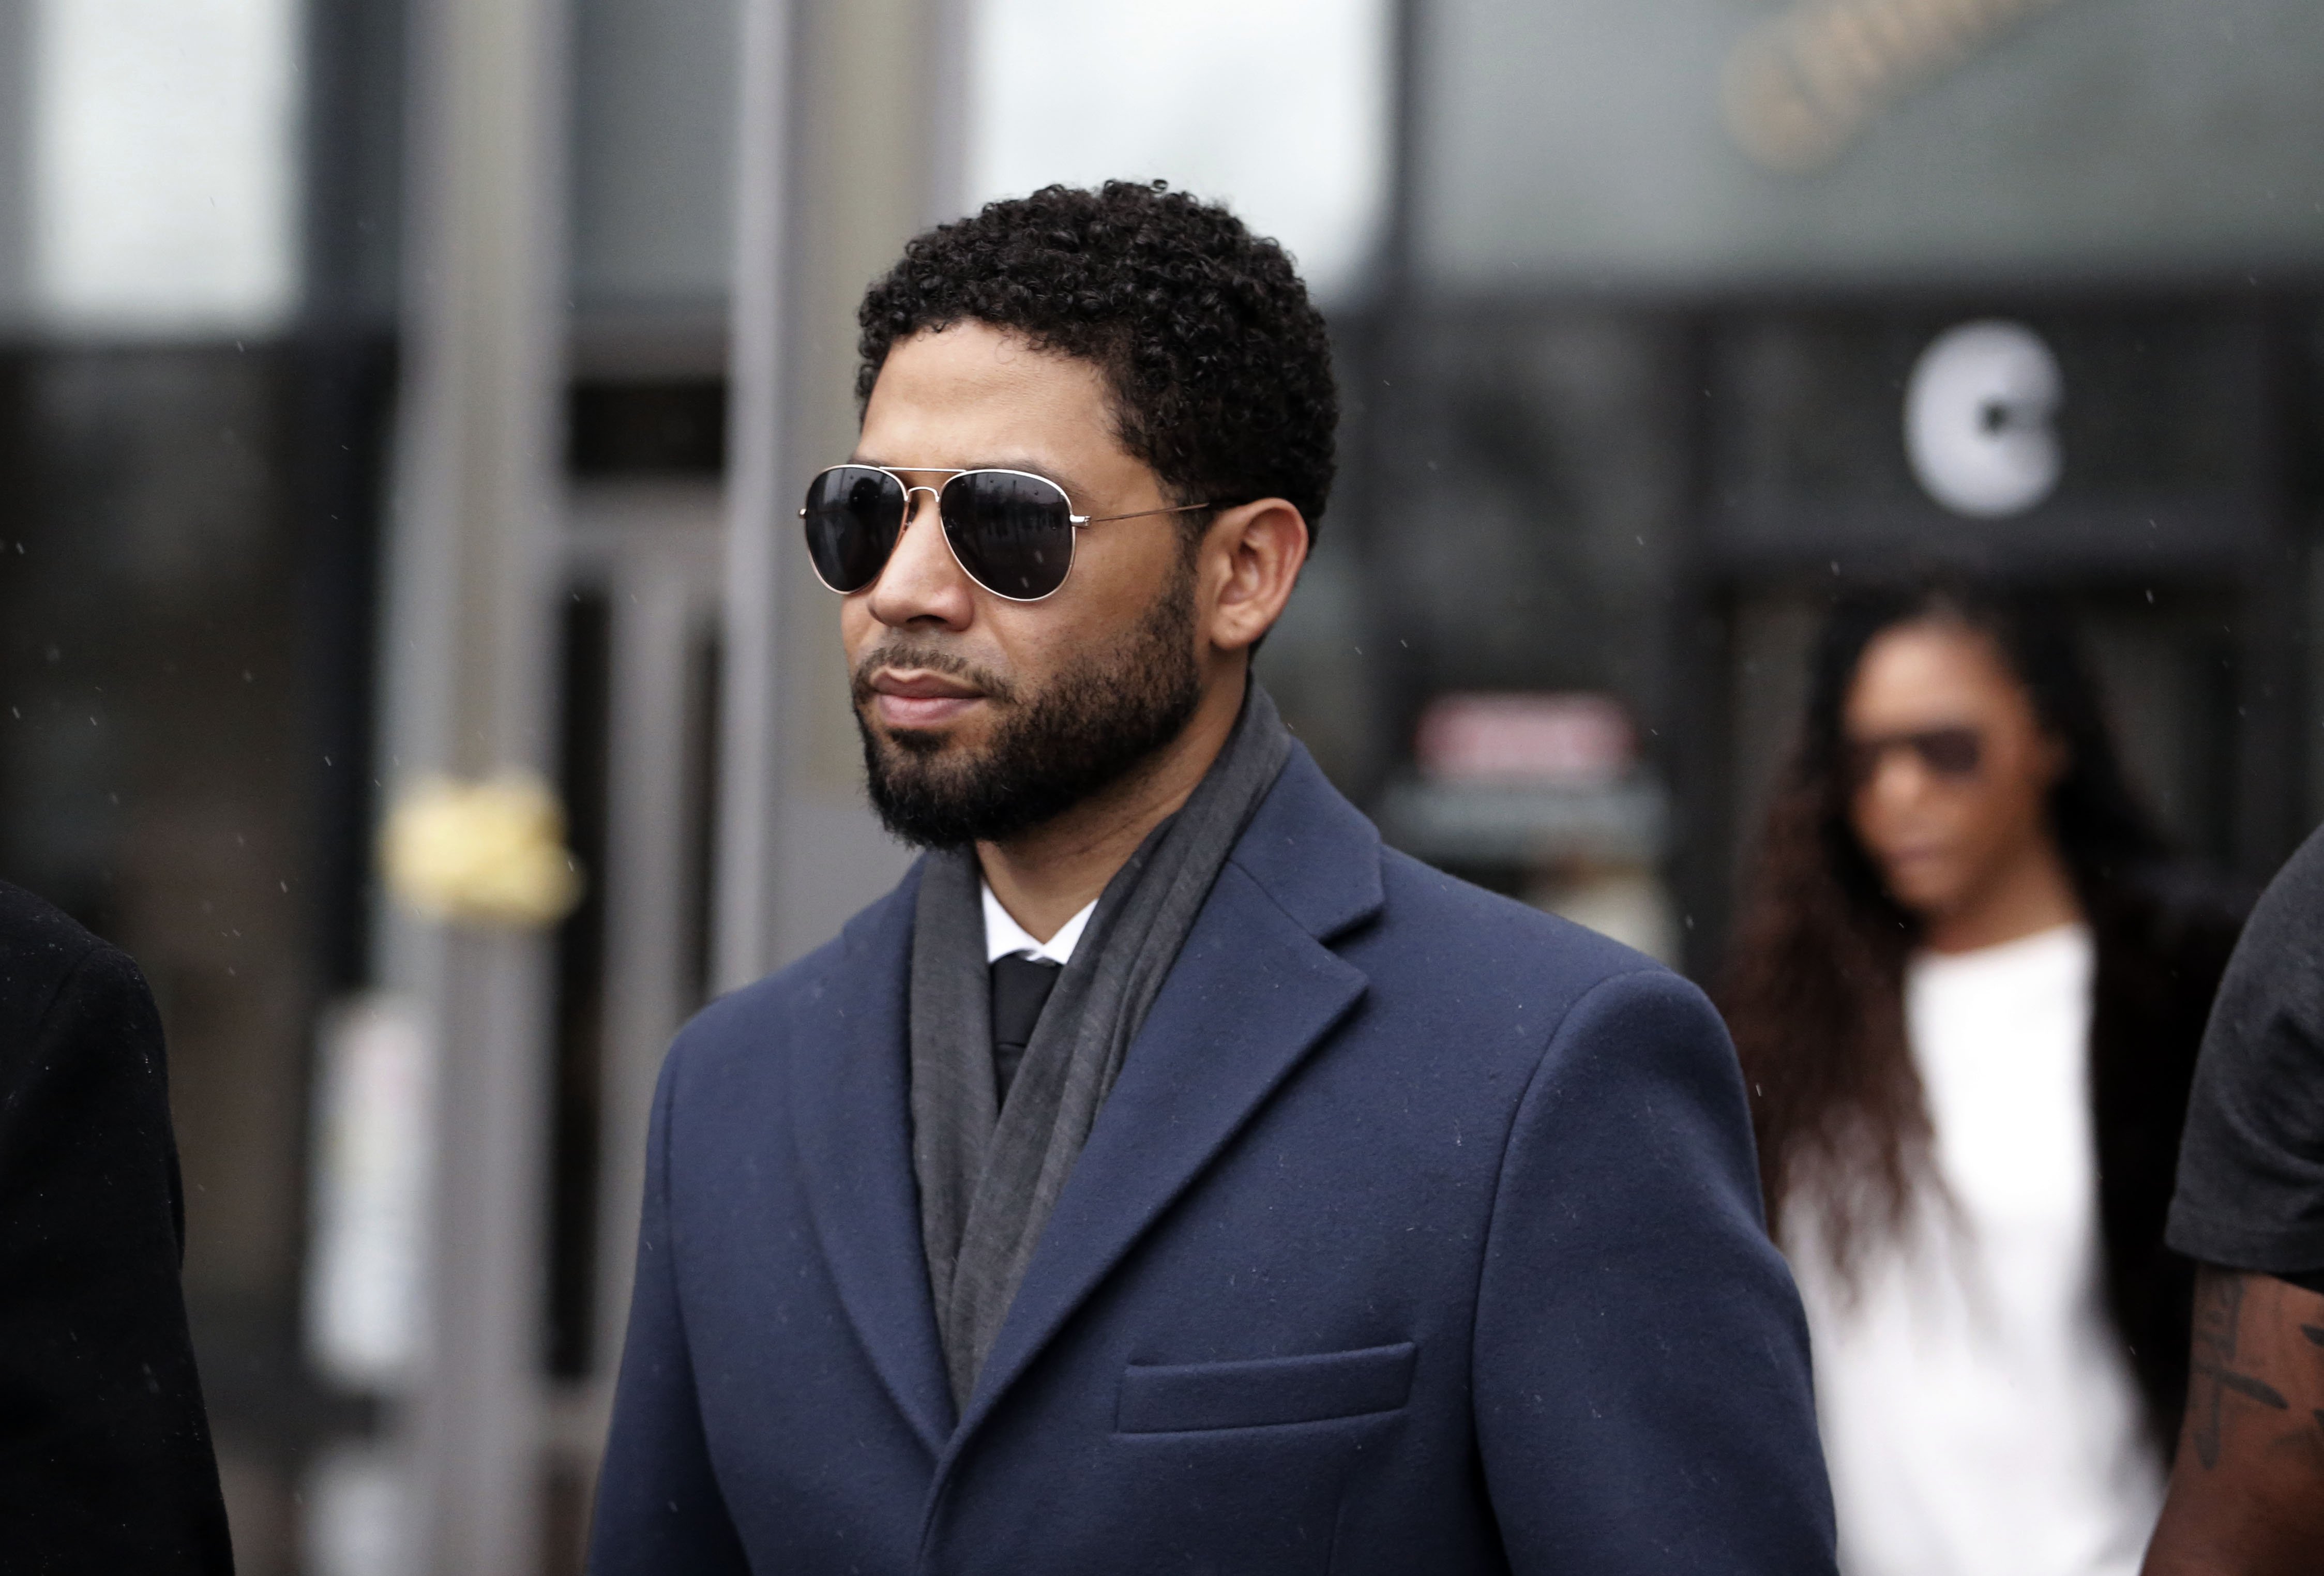 Jussie Smollett leaving Lieghton Criminal Courthouse in March 2019 in the midst of accusations of him staging his own attack.  | Source: Getty Images